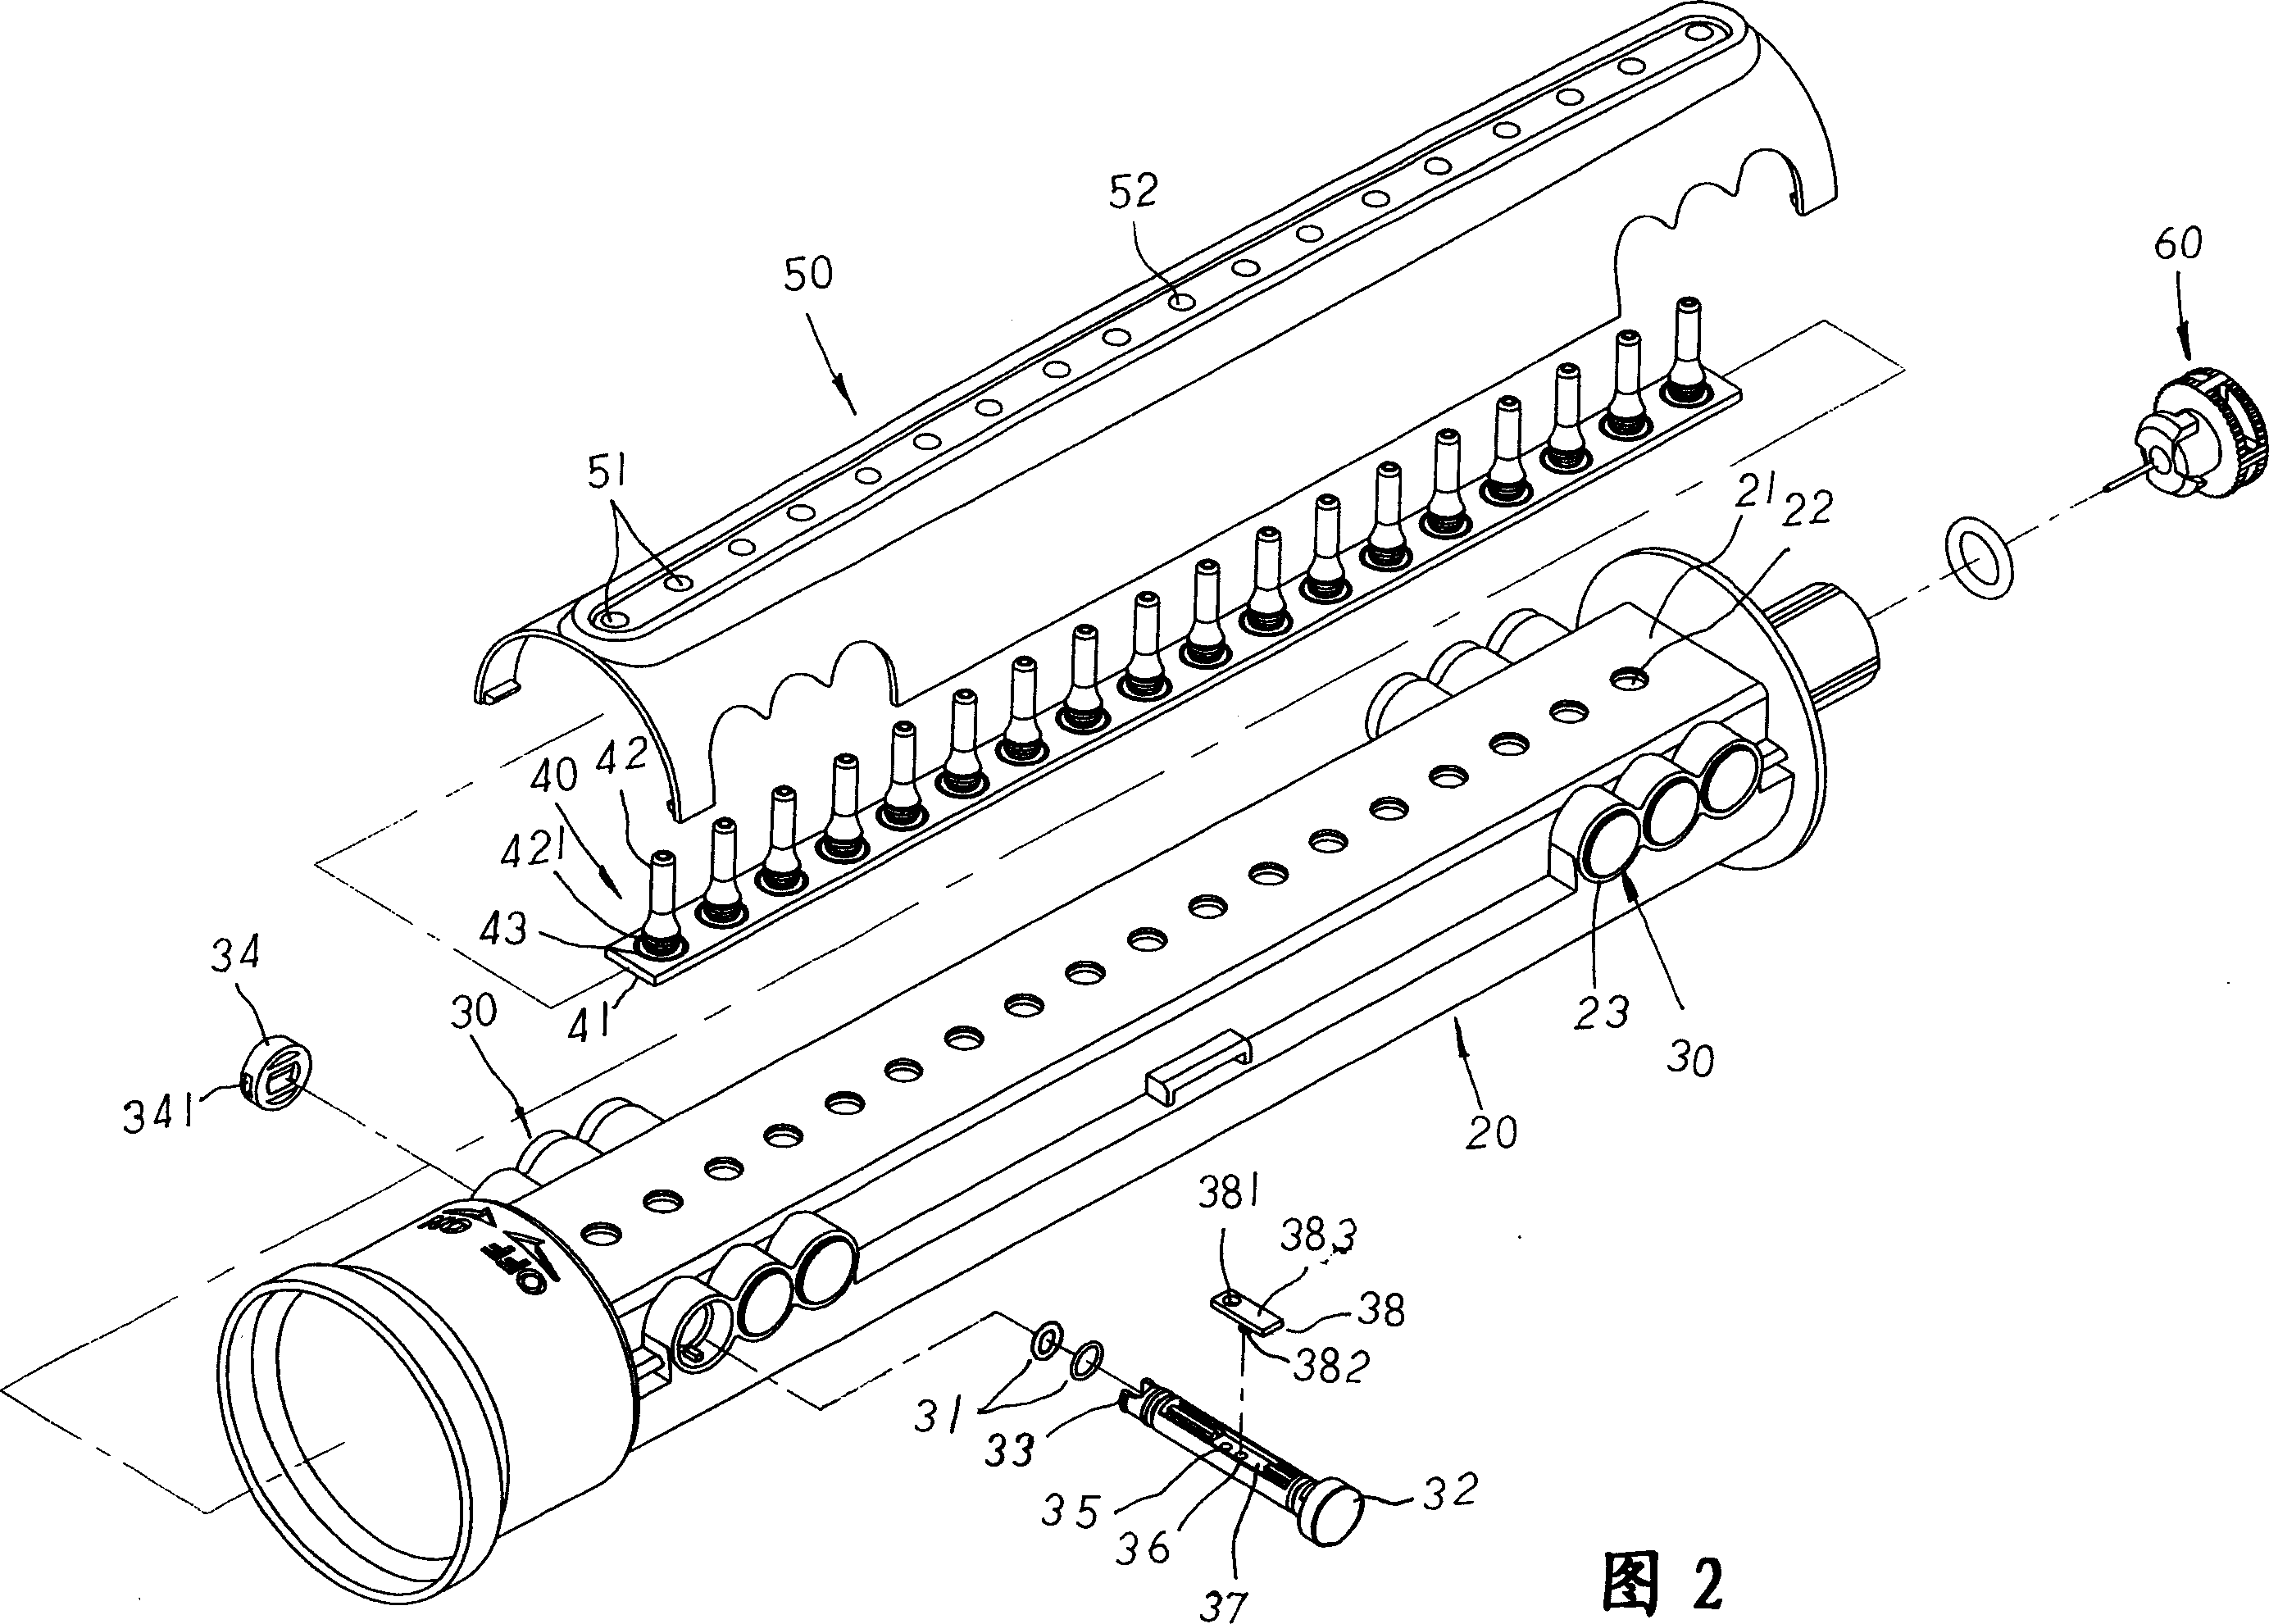 Water stopping and discharging control structure for aspergillum